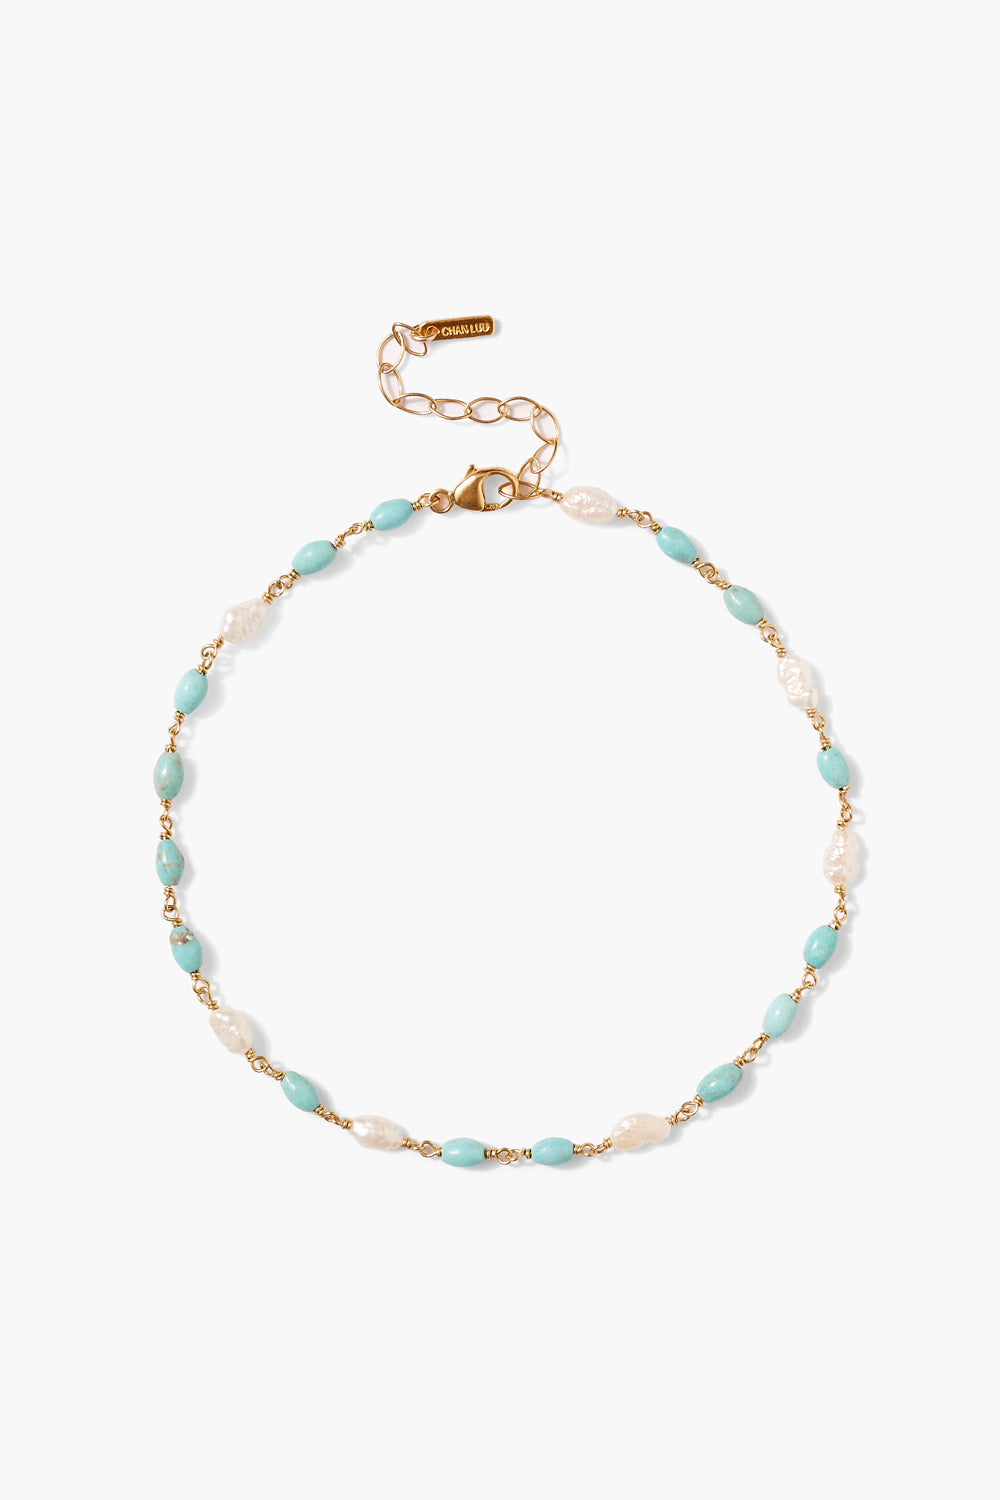 Pacifica Anklet Turquoise Mix – Chan Luu